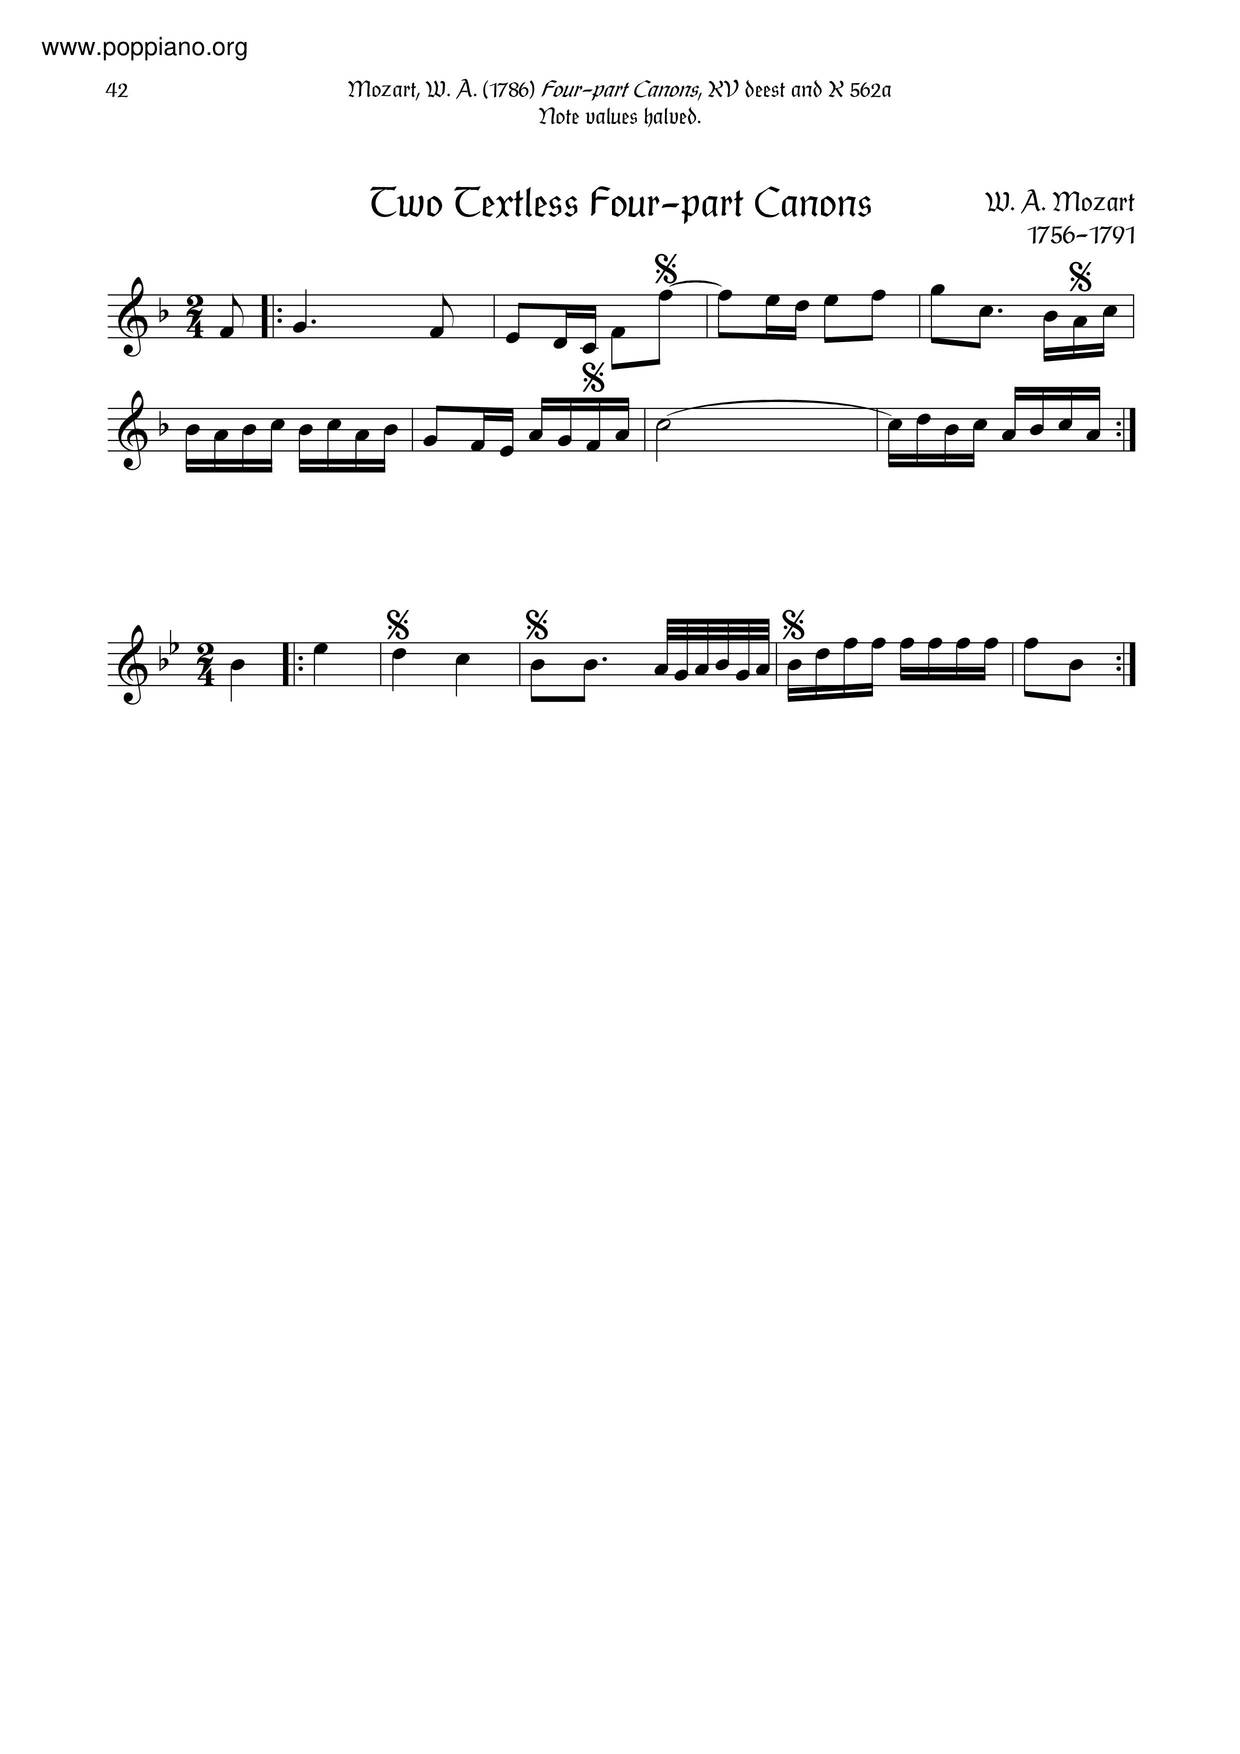 Canon For 4 Voices In B-Flat Major, K. 562A琴谱